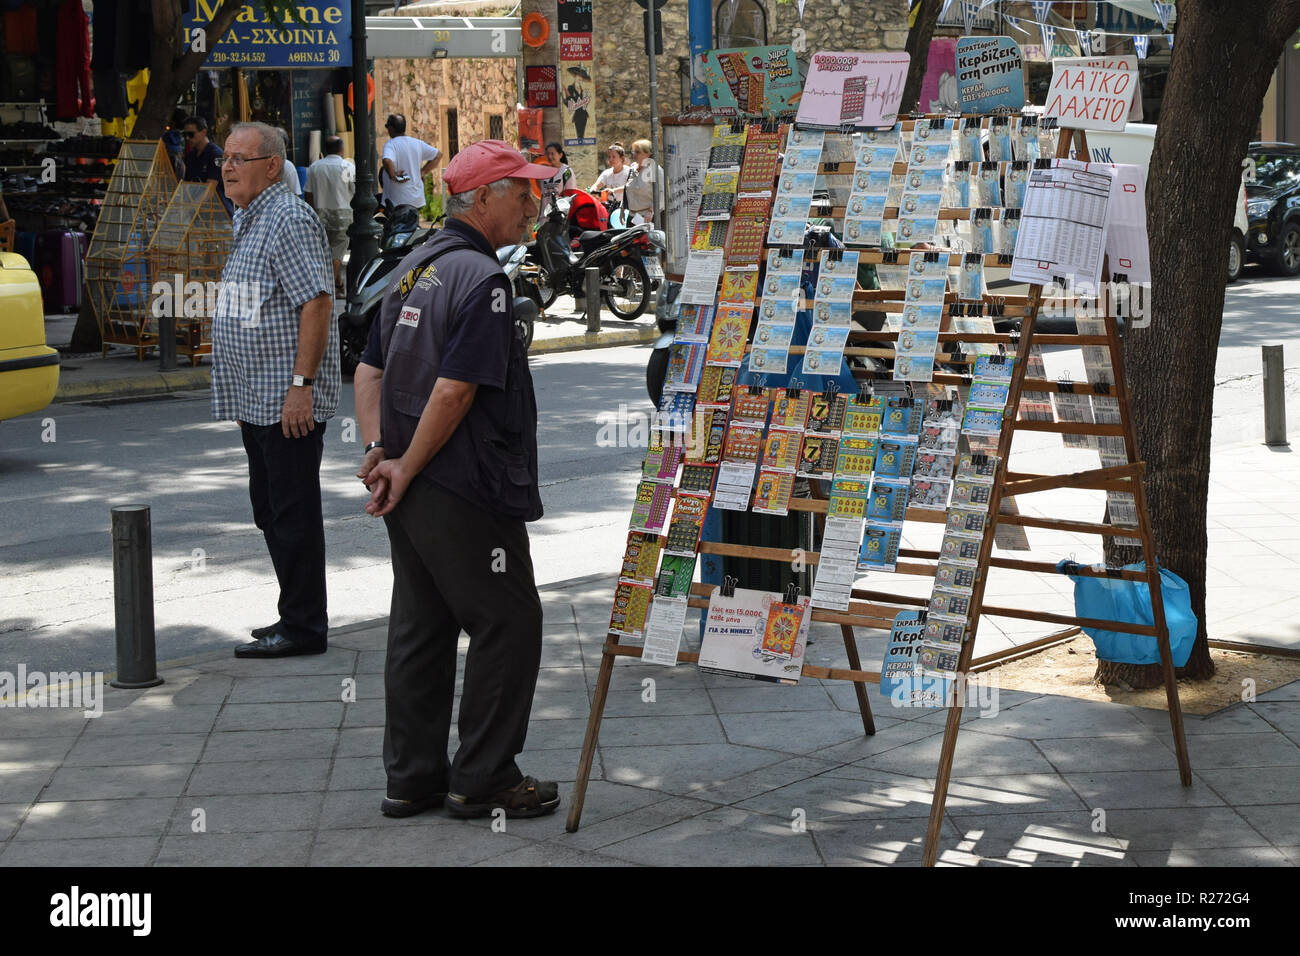 ATHENS, GREECE - AUGUST 29, 2018: Man selling lottery tickets on busy street in downtown Athens. Stock Photo